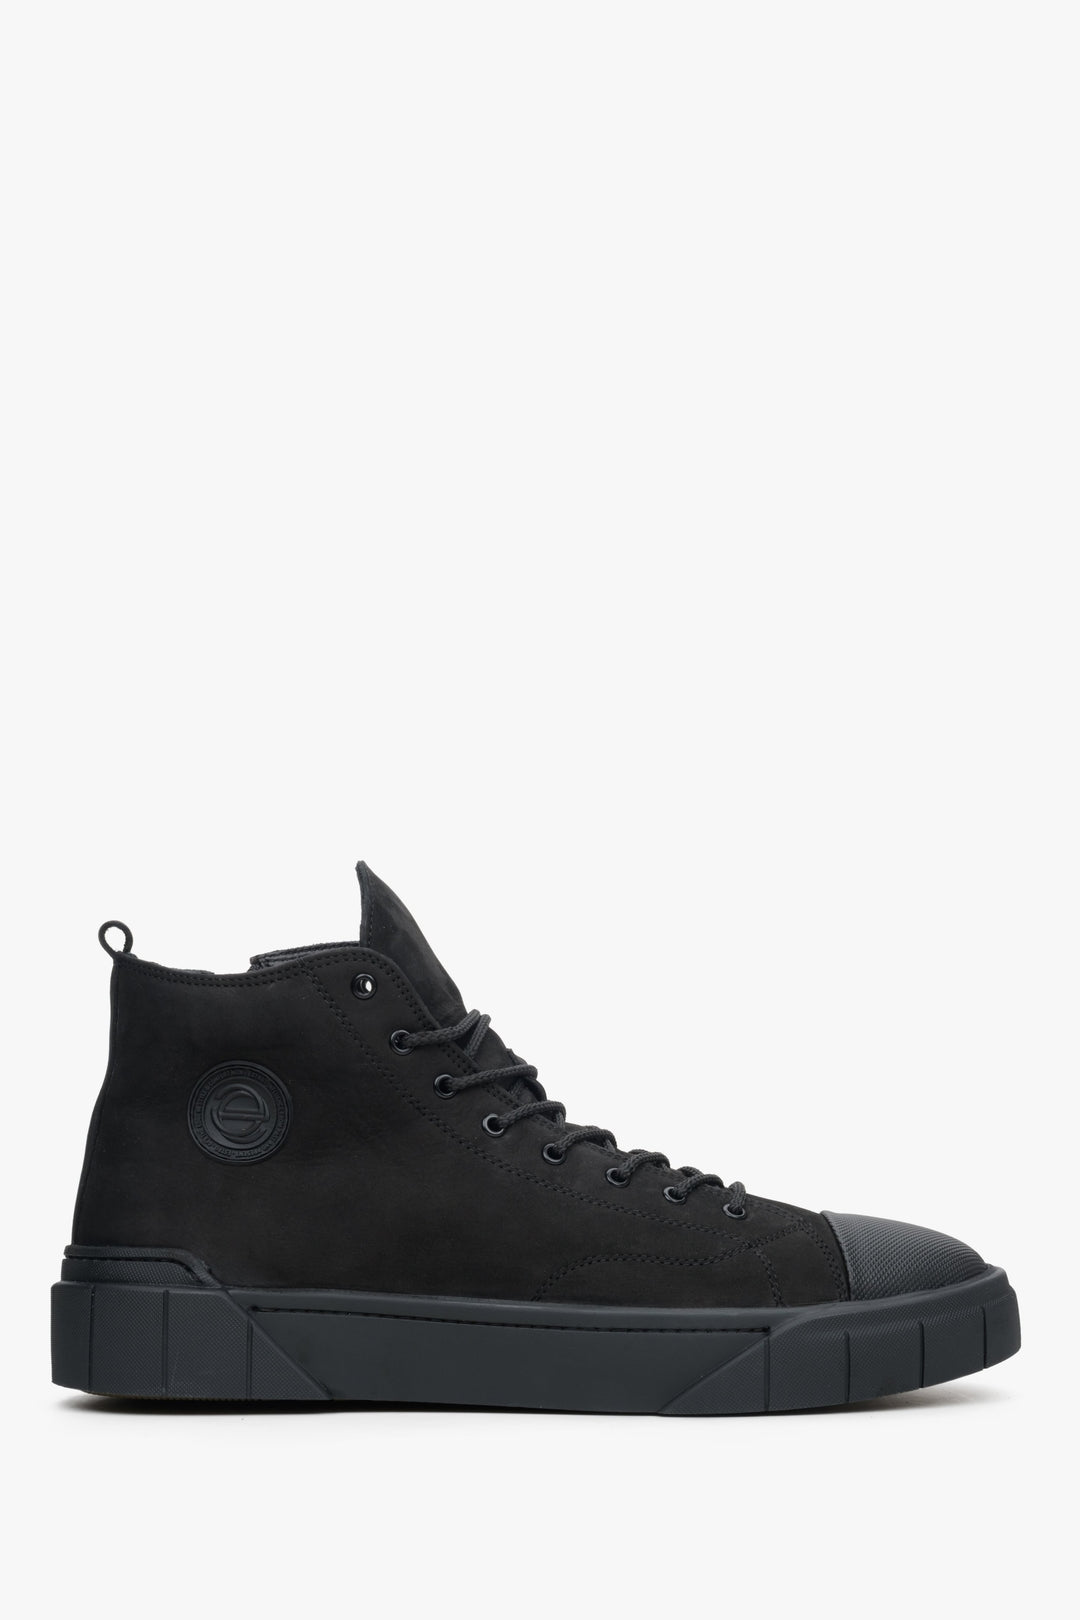 Men's Black High-top Winter Sneakers made of Suede with Fur Lining Estro ER00113958.